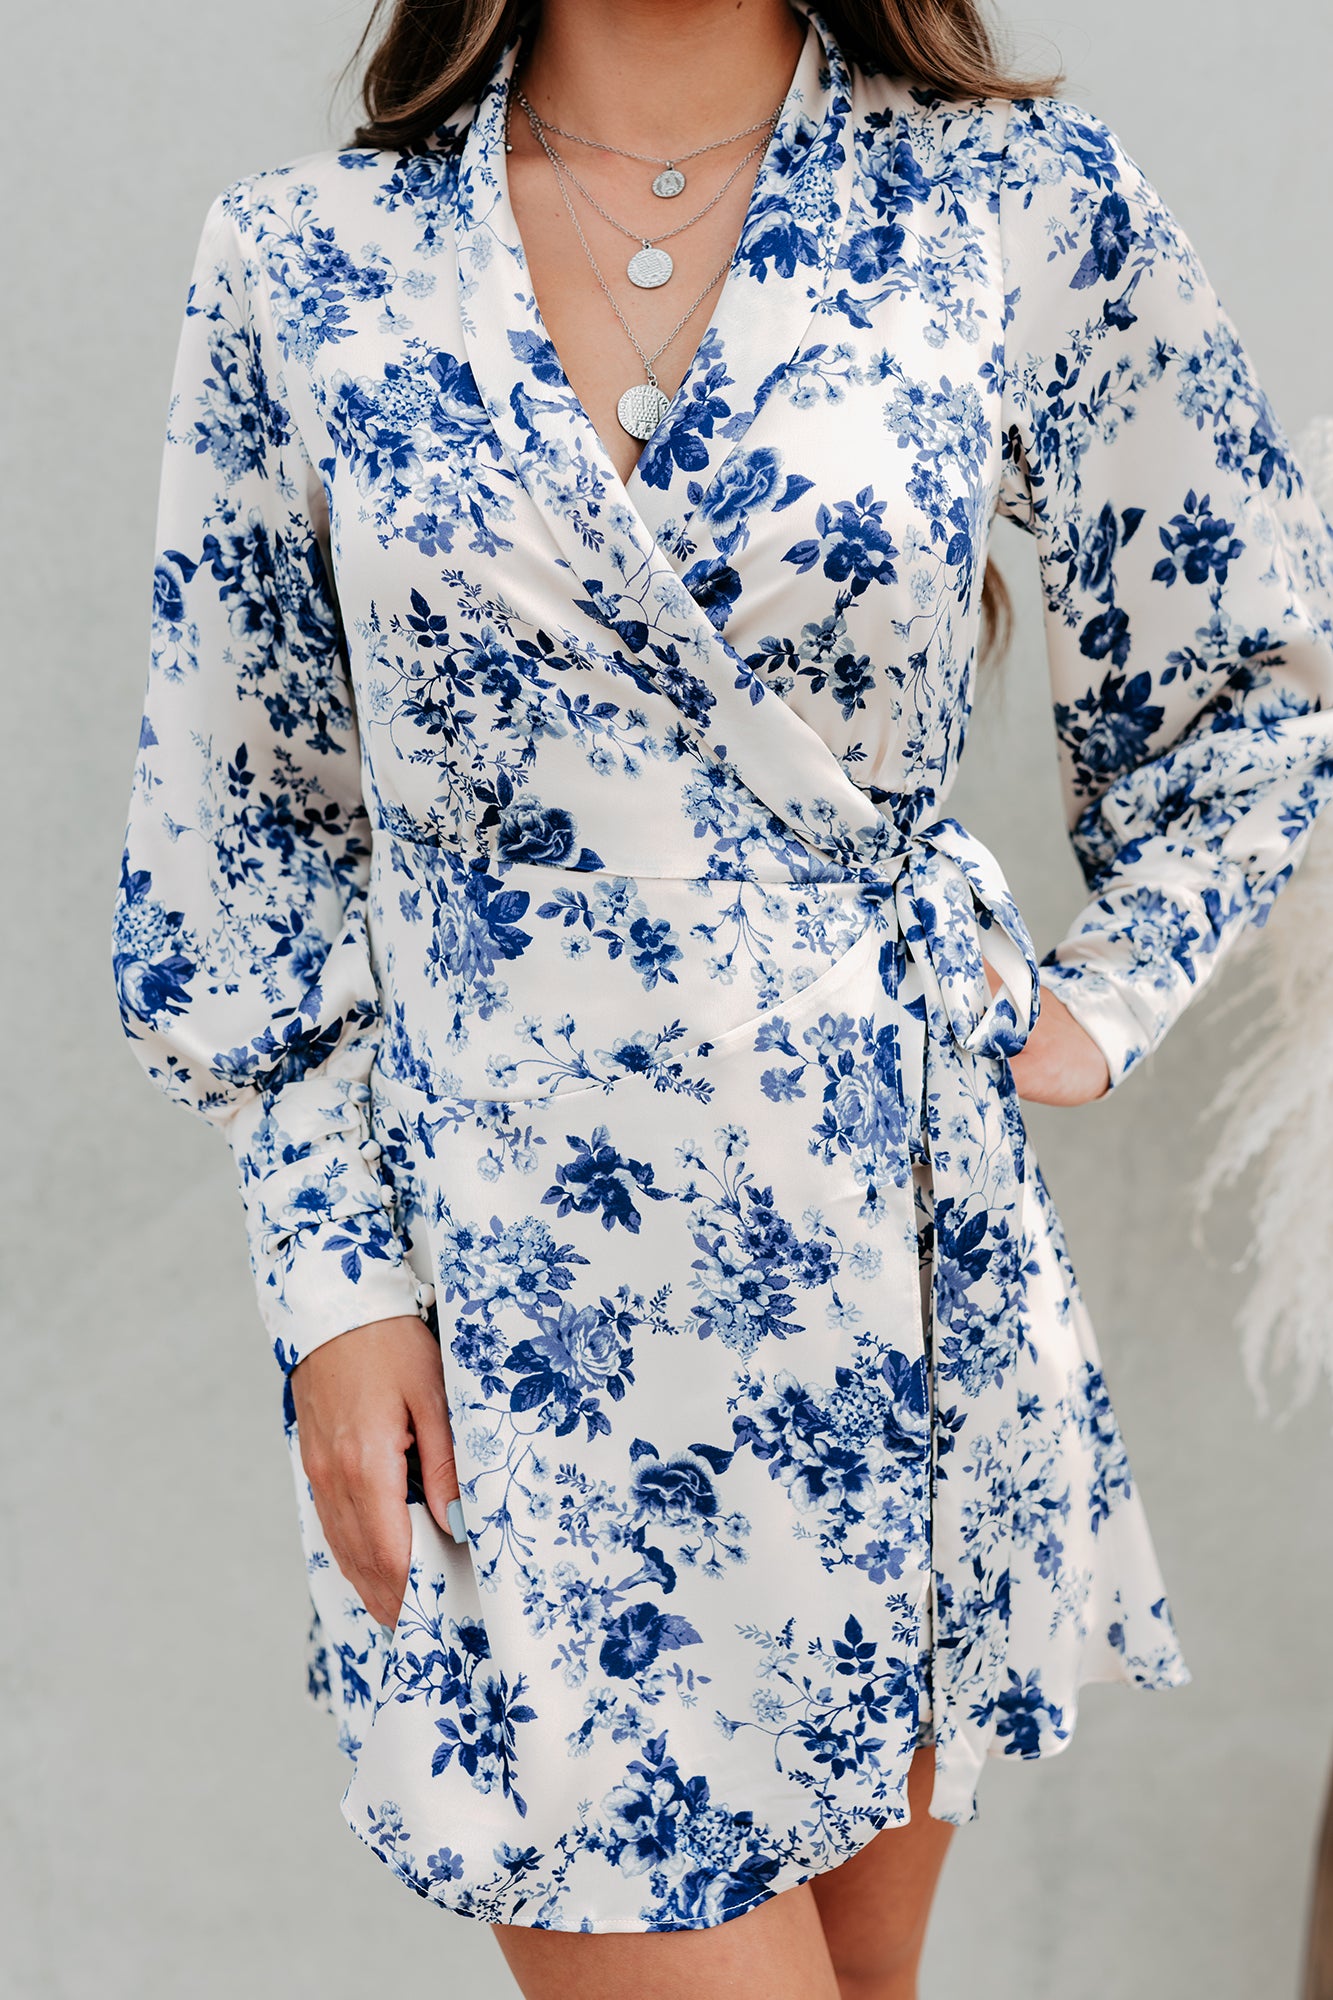 There's Only You Satin Floral Wrap Dress (Cream/Navy) - NanaMacs